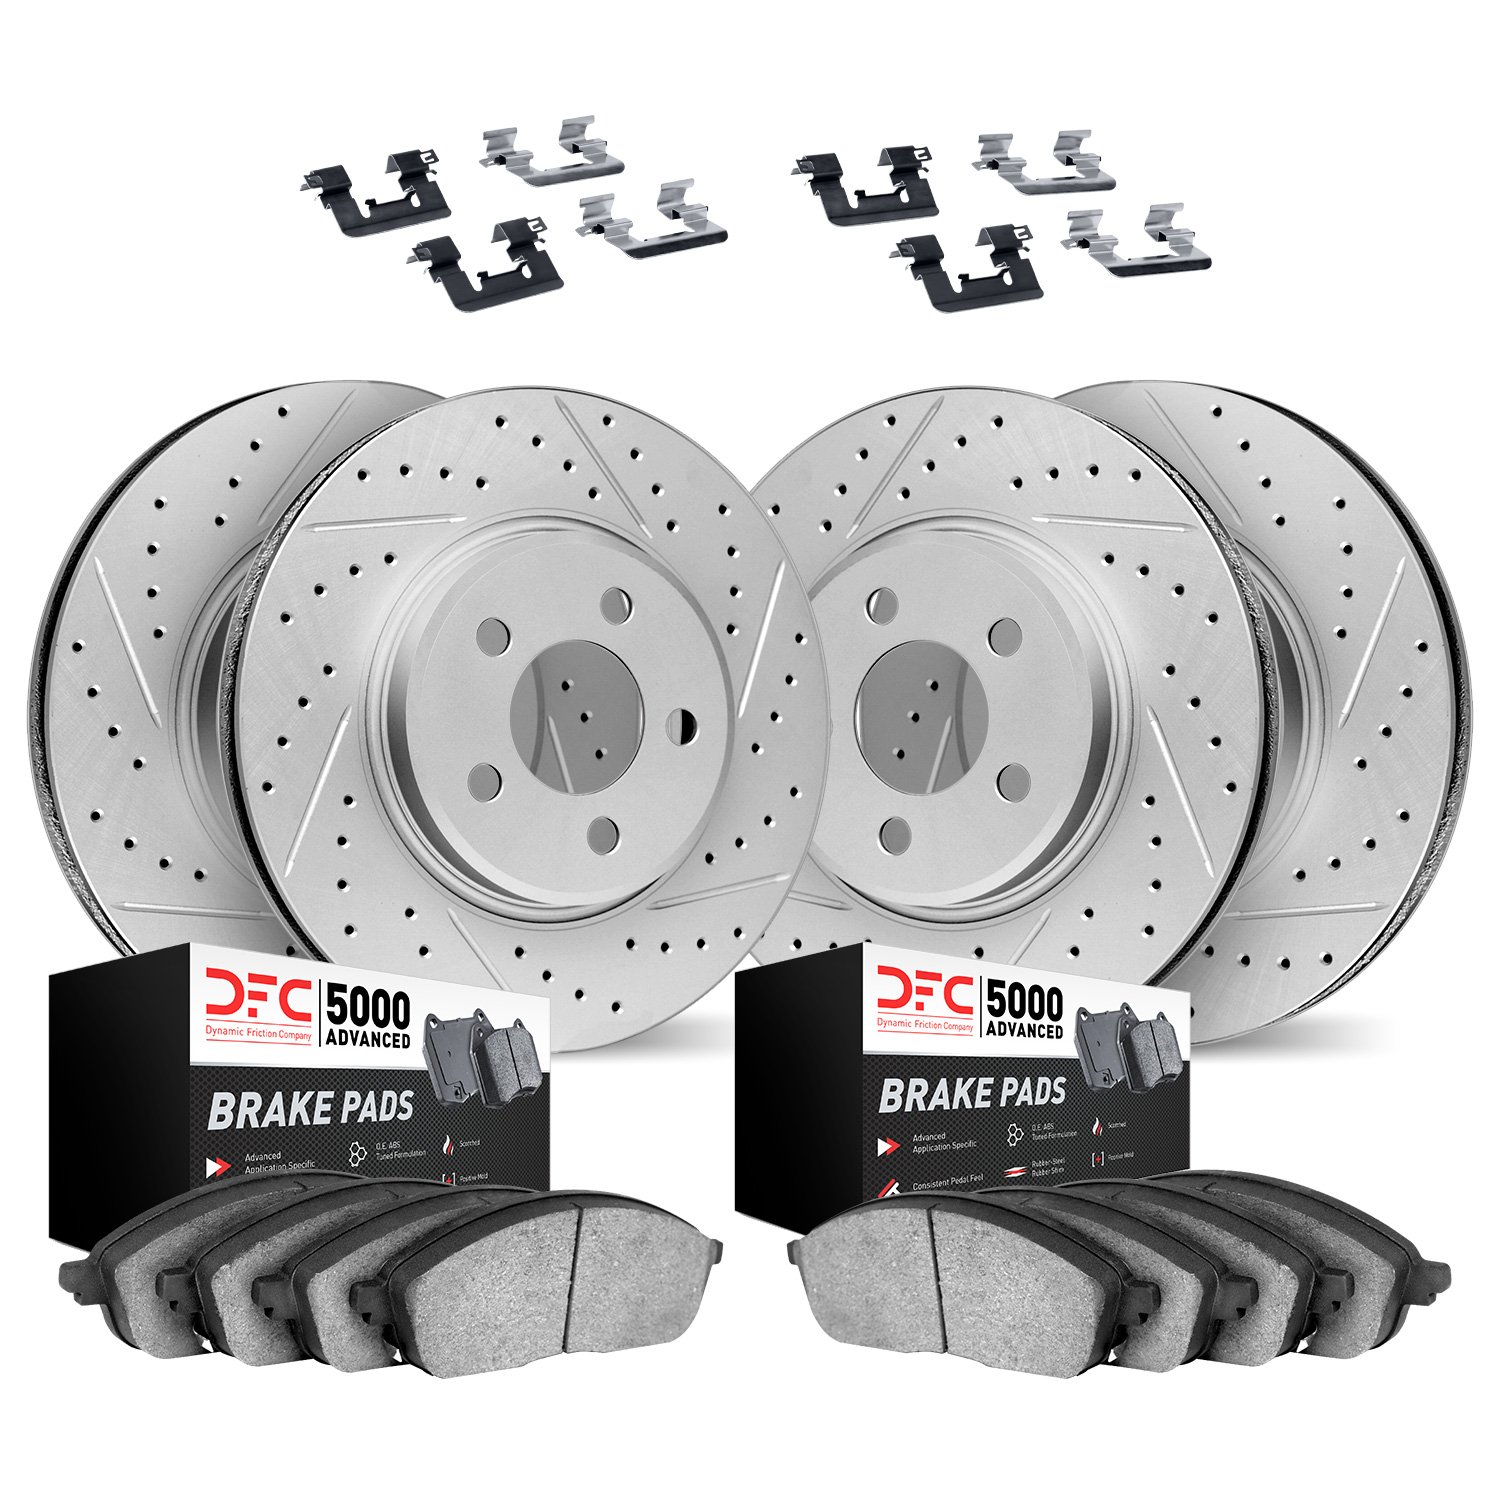 2514-31017 Geoperformance Drilled/Slotted Rotors w/5000 Advanced Brake Pads Kit & Hardware, 2006-2006 BMW, Position: Front and R